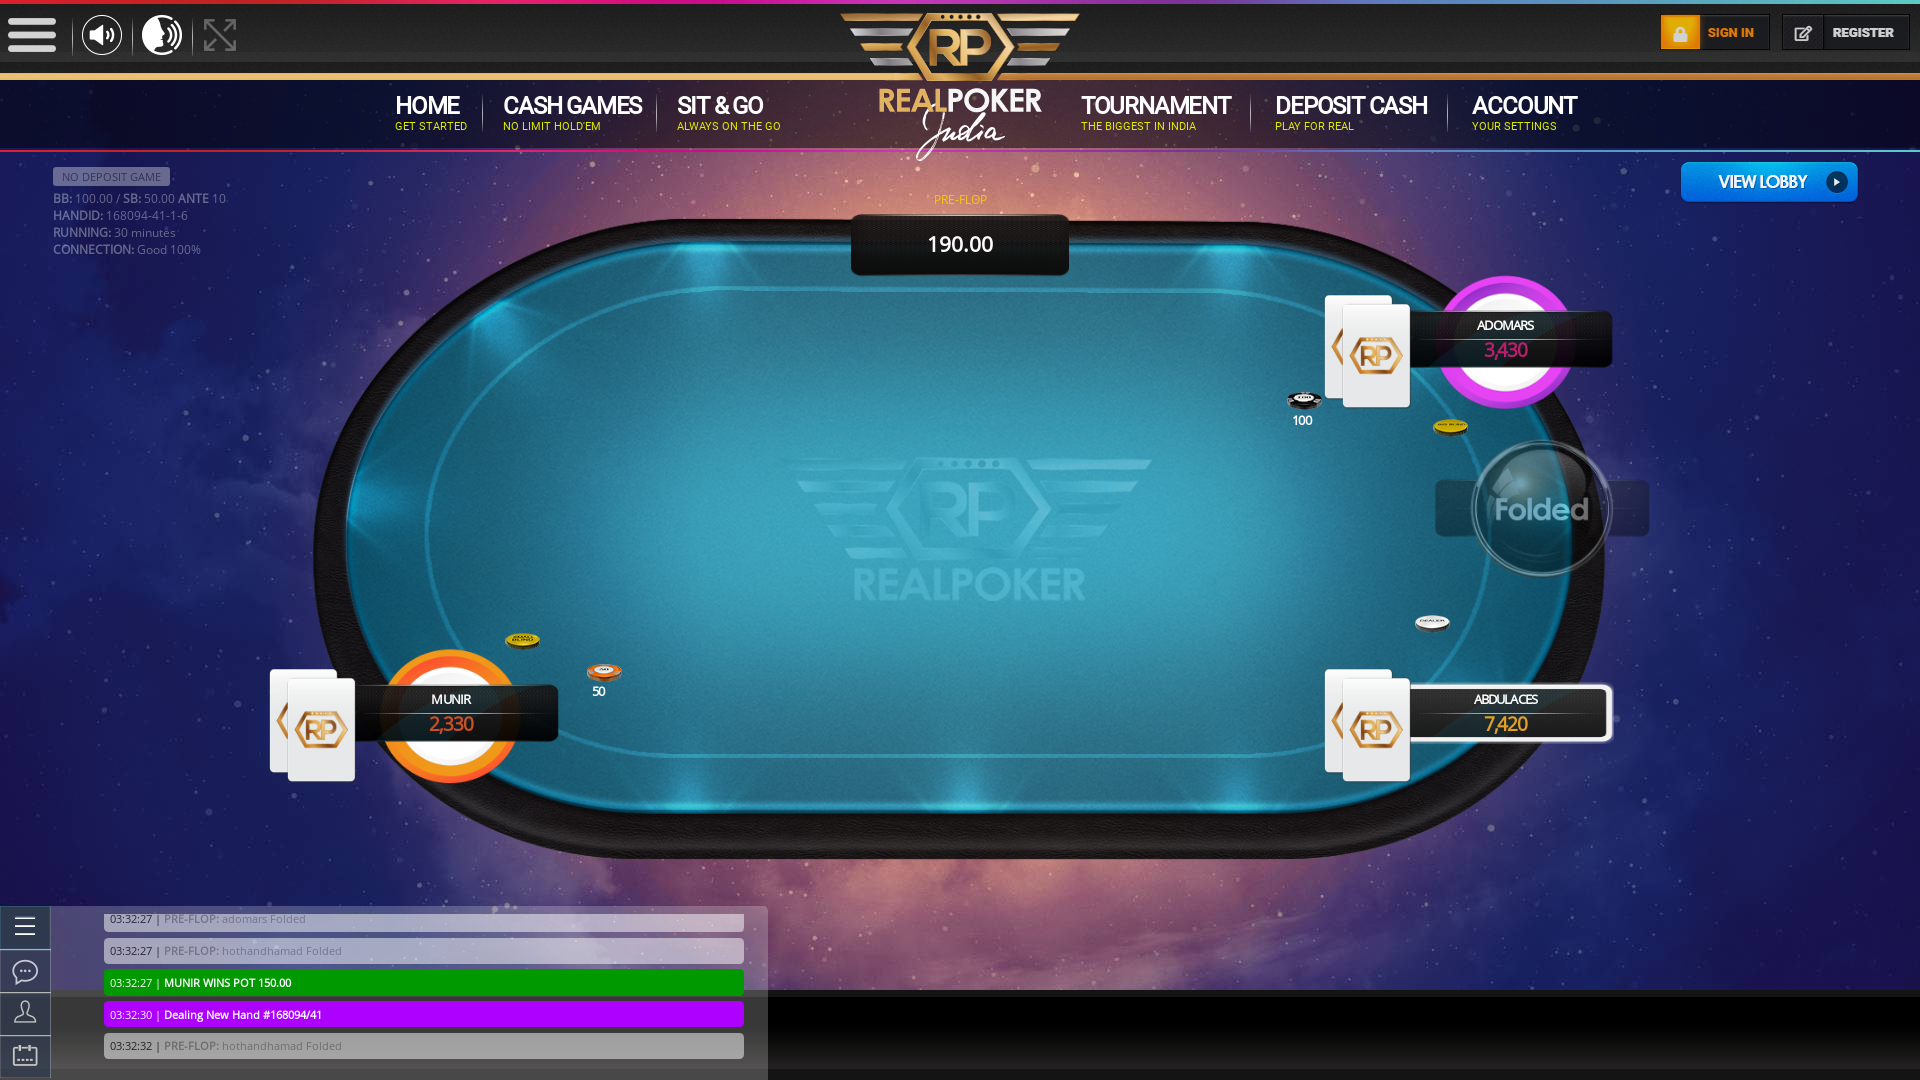 Real poker 10 player table in the 30th minute